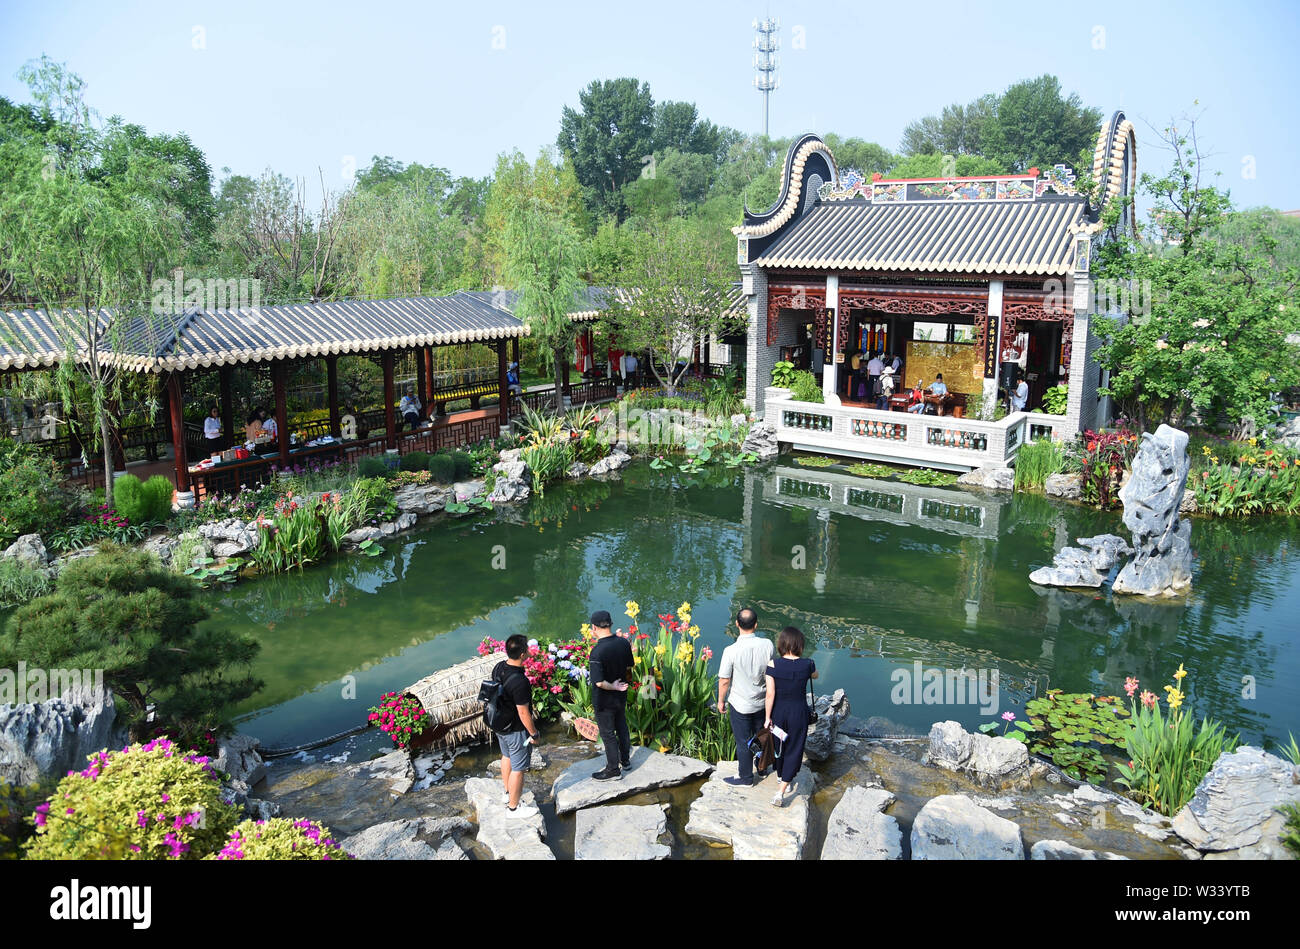 (190712) -- BEIJING, July 12, 2019 (Xinhua) -- Tourists visit the 'Nanyue Garden' during the 'Guangdong Day' event at the Beijing International Horticultural Exhibition in Beijing, capital of China, July 11, 2019. Located in south China, Guangdong Province faces the South China Sea and borders Hunan and Jiangxi provinces to the north. It boasts the well-known Pearl River Delta, which is composed of three upstream rivers and a large number of islands. Due to the climate, Guangdong is famous for a diversified ecological system and environment. In recent years, by upholding the principle of gr Stock Photo